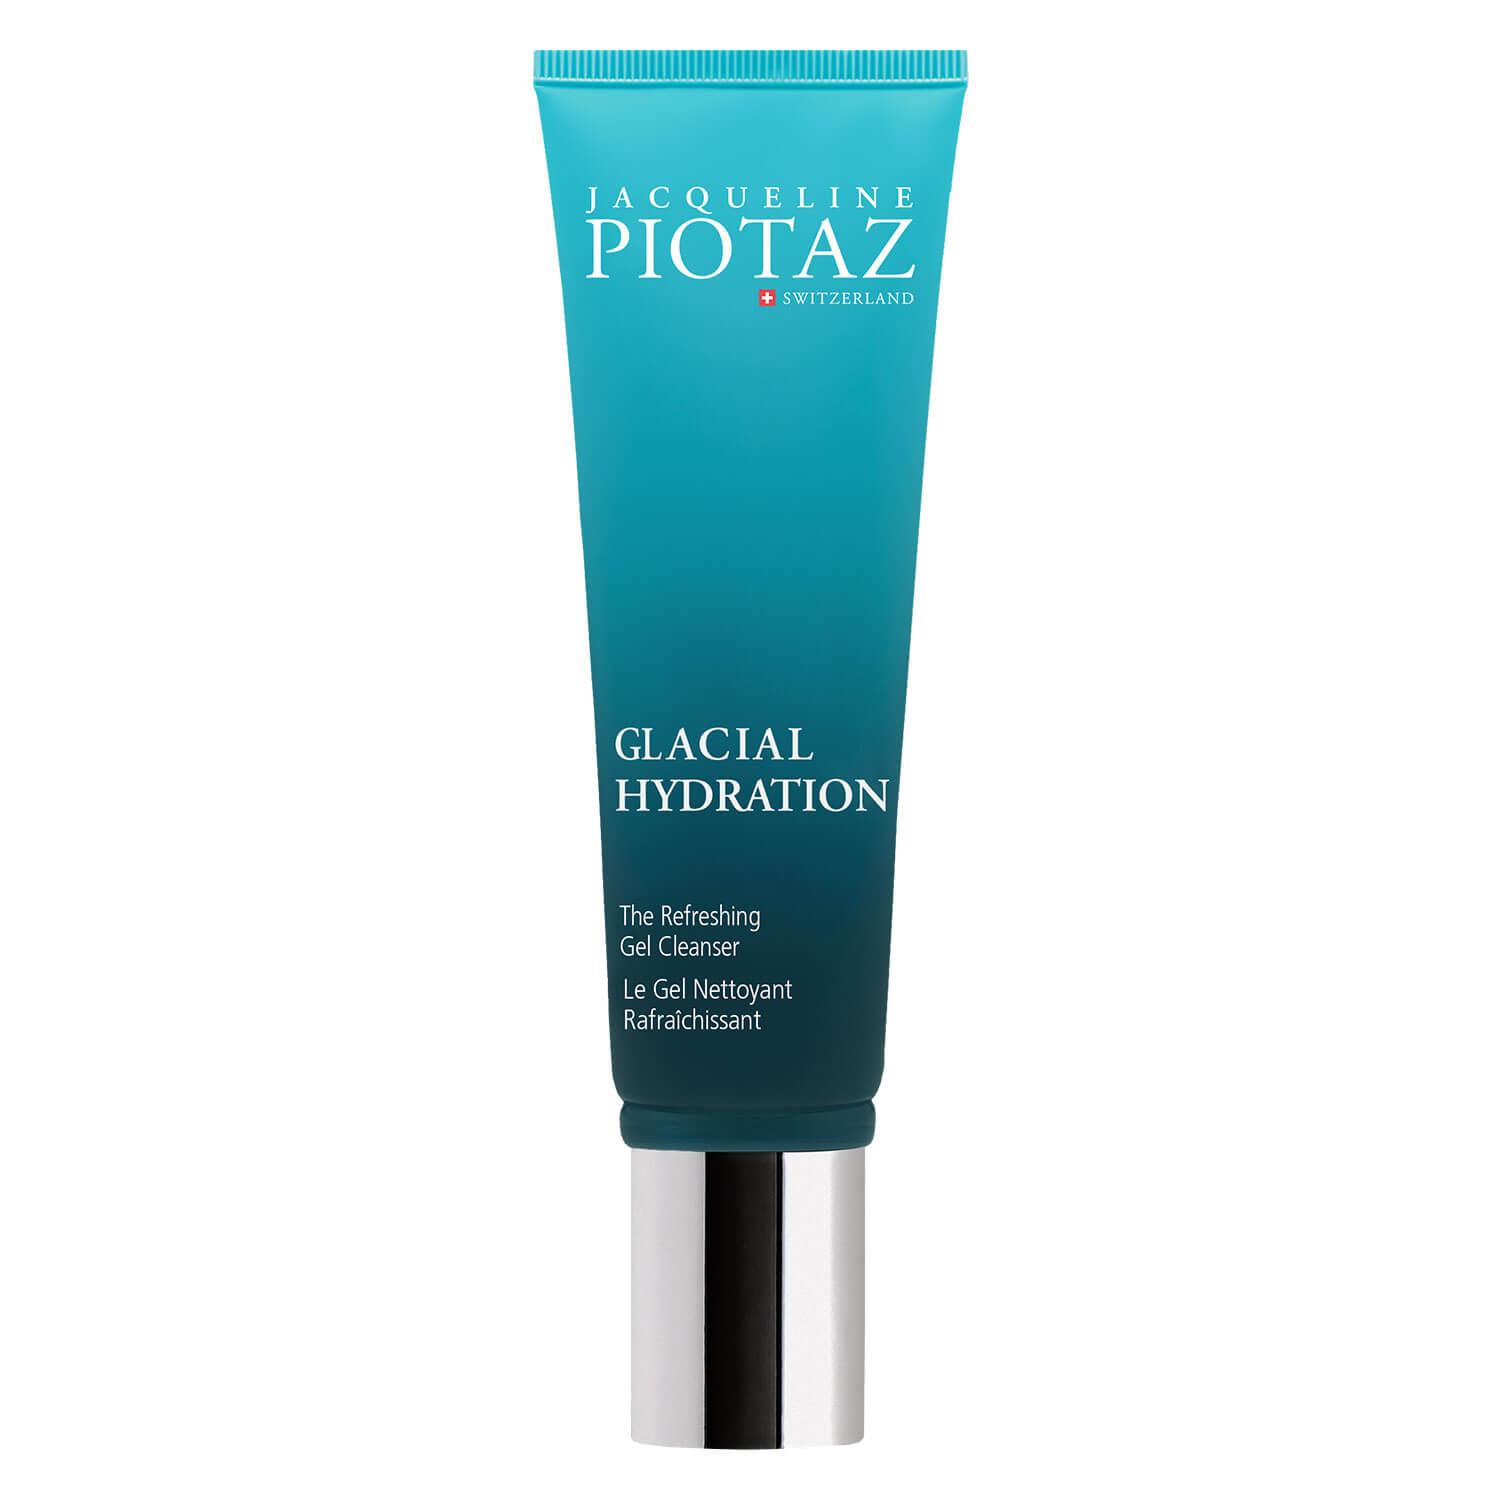 Glacial Hydration - The Refreshing Gel Cleanser